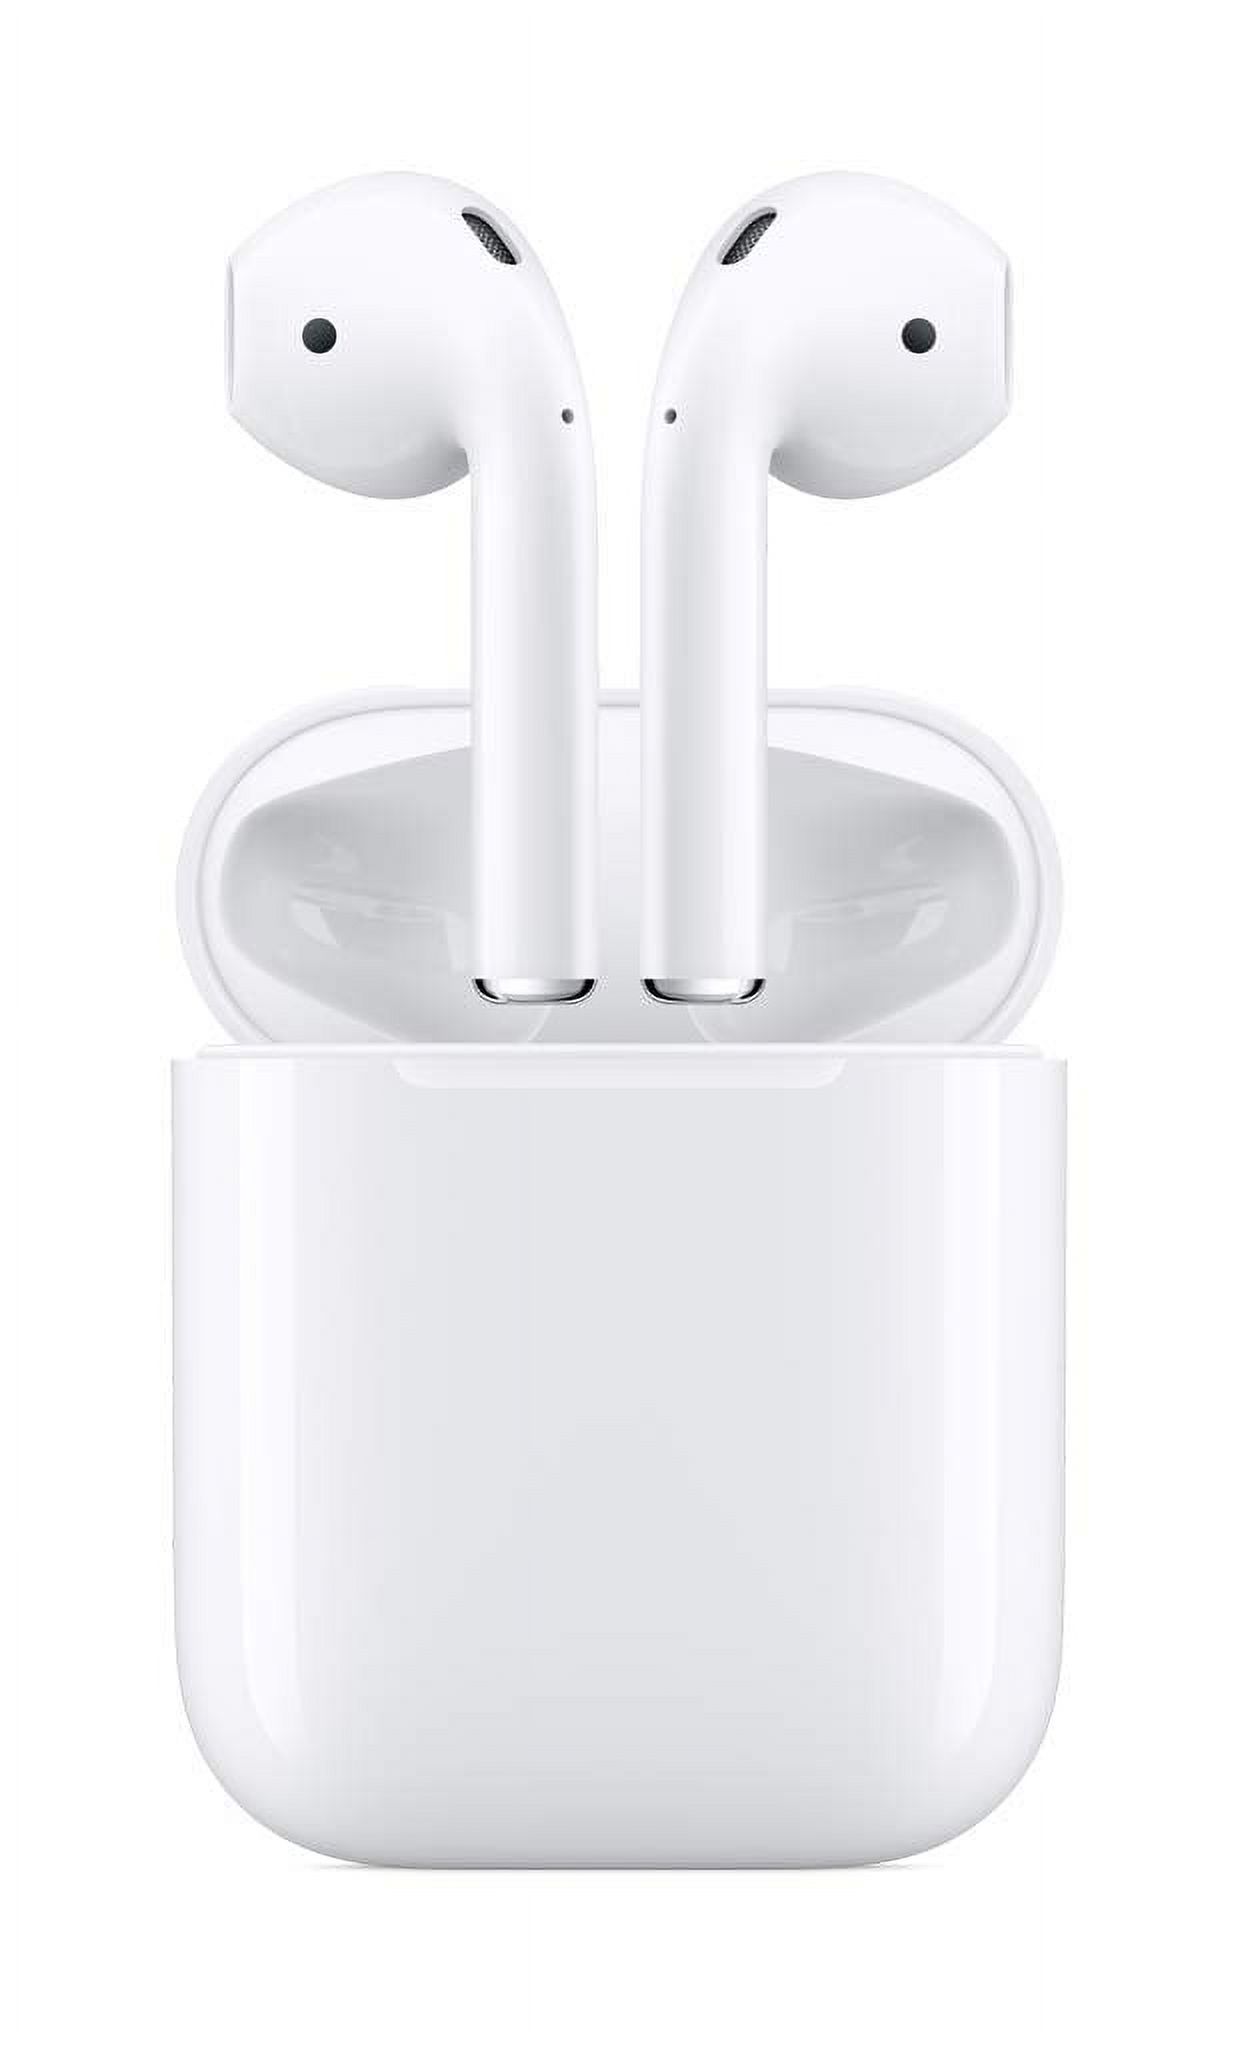 Restored Apple True Wireless Headphones with Charging Case, White, VIPRB-MV7N2AM/A (Refurbished) - image 3 of 5